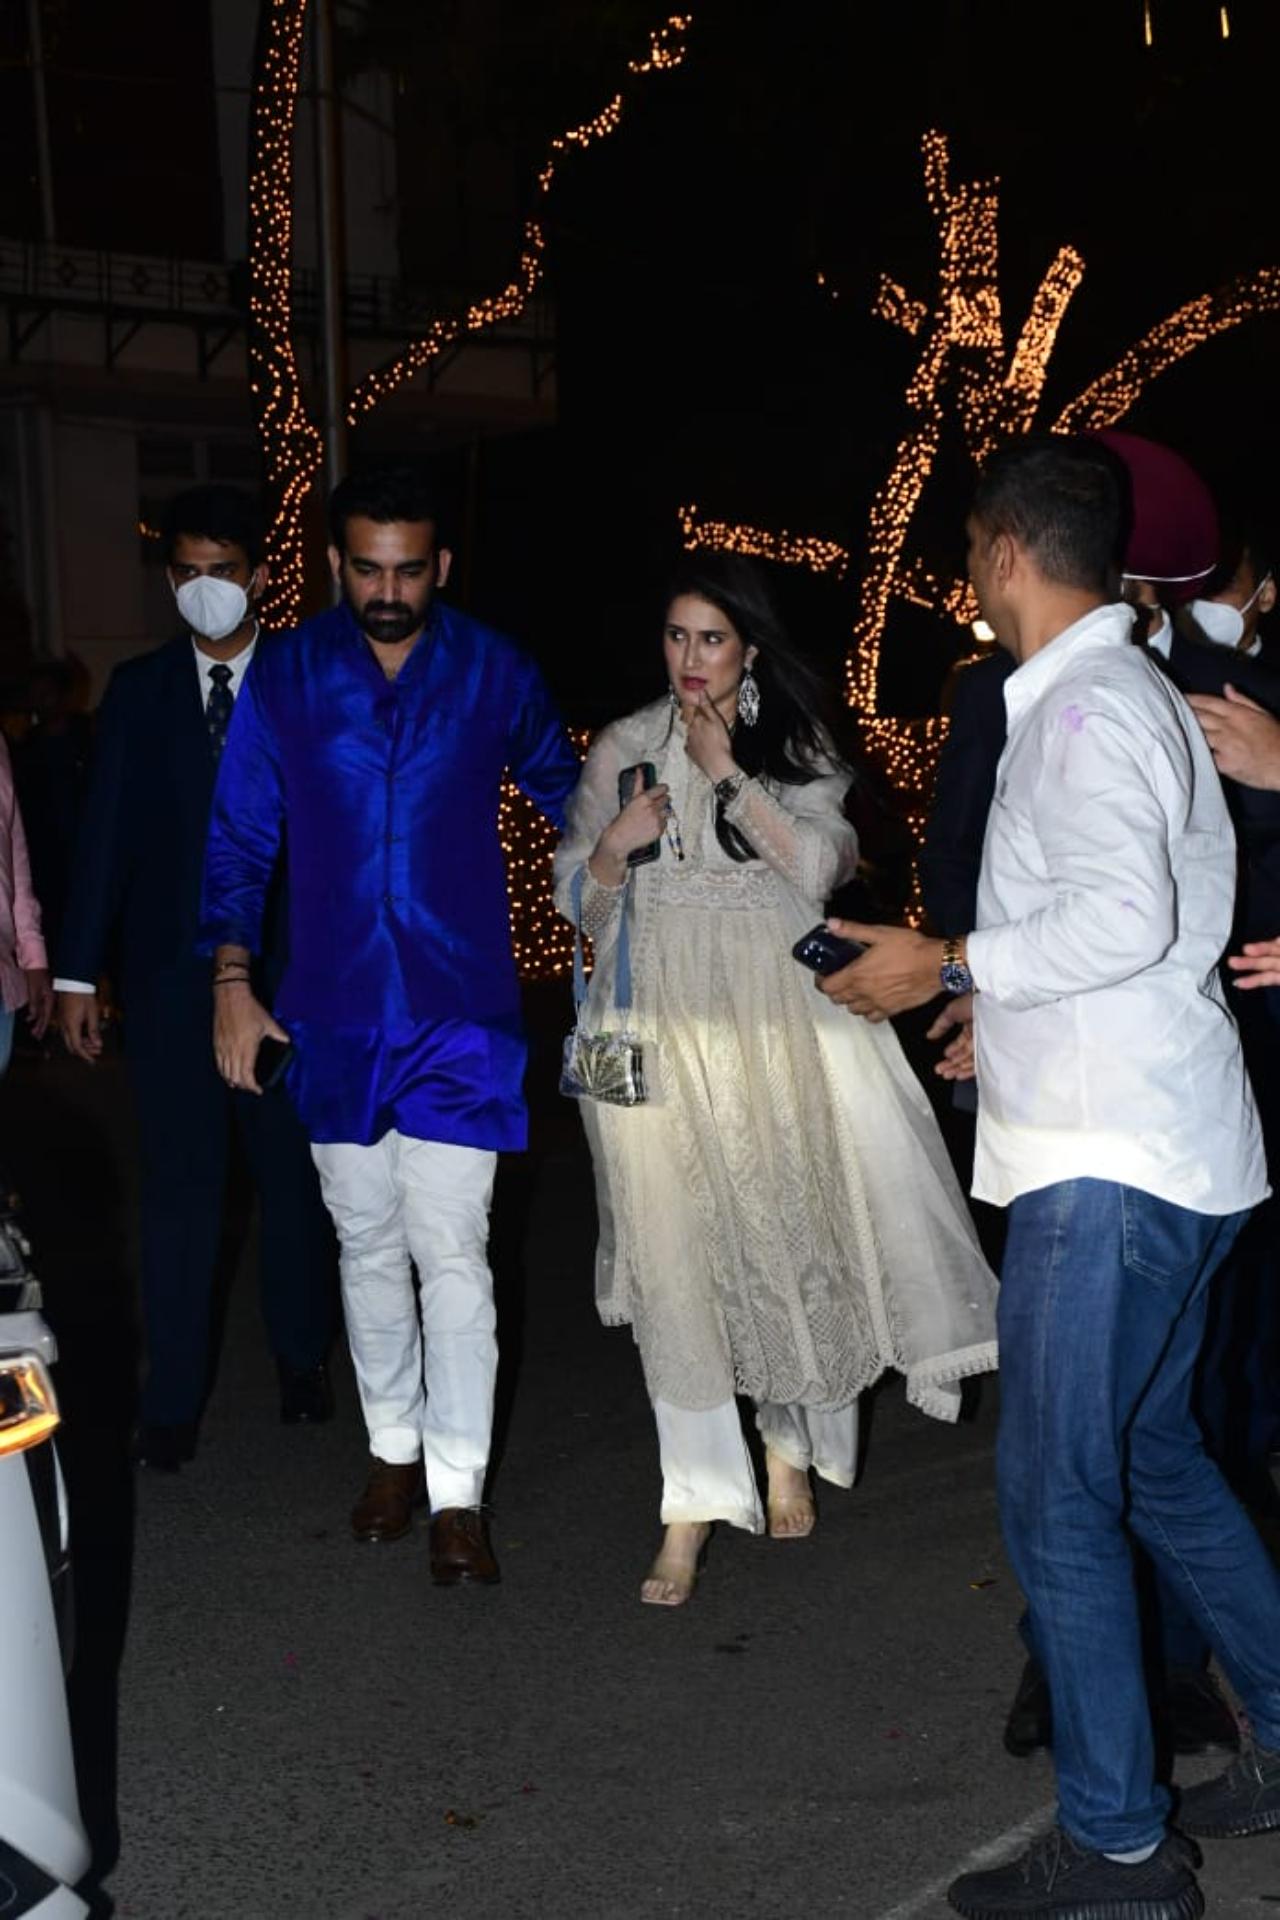 Cricketer Zaheer Khan and his actress wife Sagarika were also at the party. While Zaheer opted for a shiny blue kurta, Sagarika looked stunning in an off-white suit